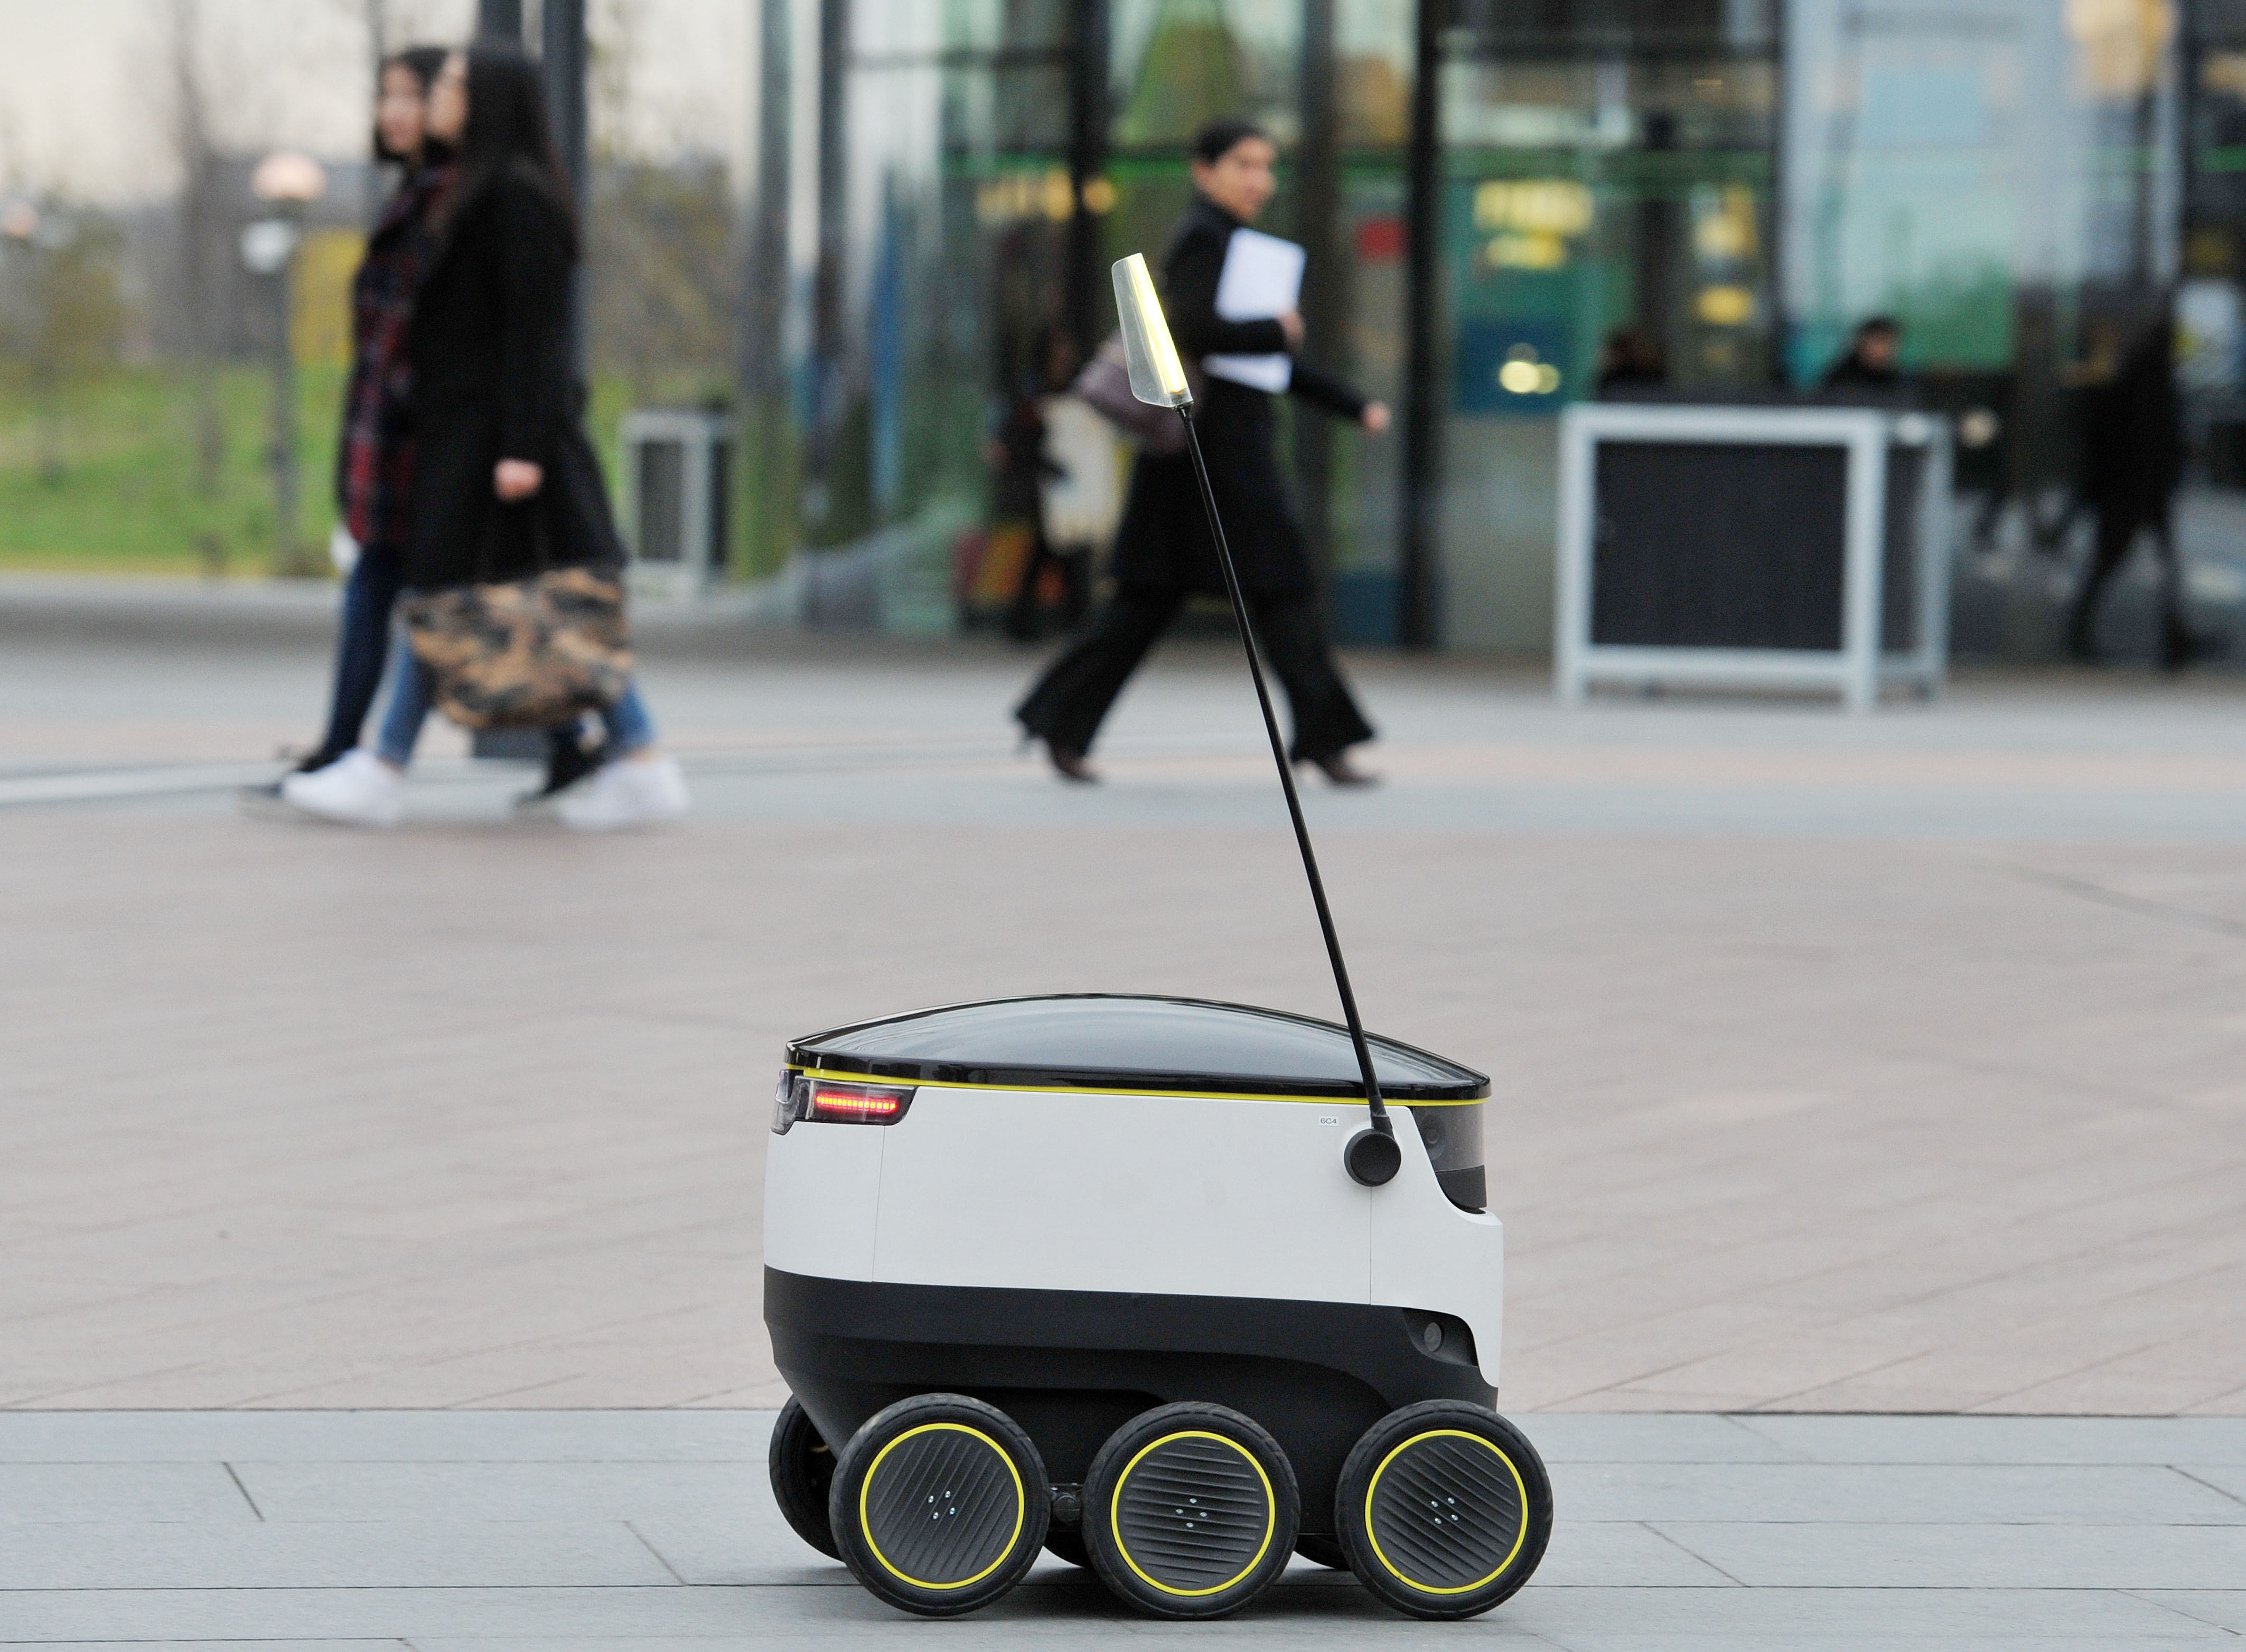 Starship Technologies self-driving delivery robot. A Starship Technologies' self-driving delivery robot during the launch of its UK trials, at their office on the Greenwich Peninsula, south London on March 10, 2016. (Nick Ansell—PA Wire/Press Association Images)